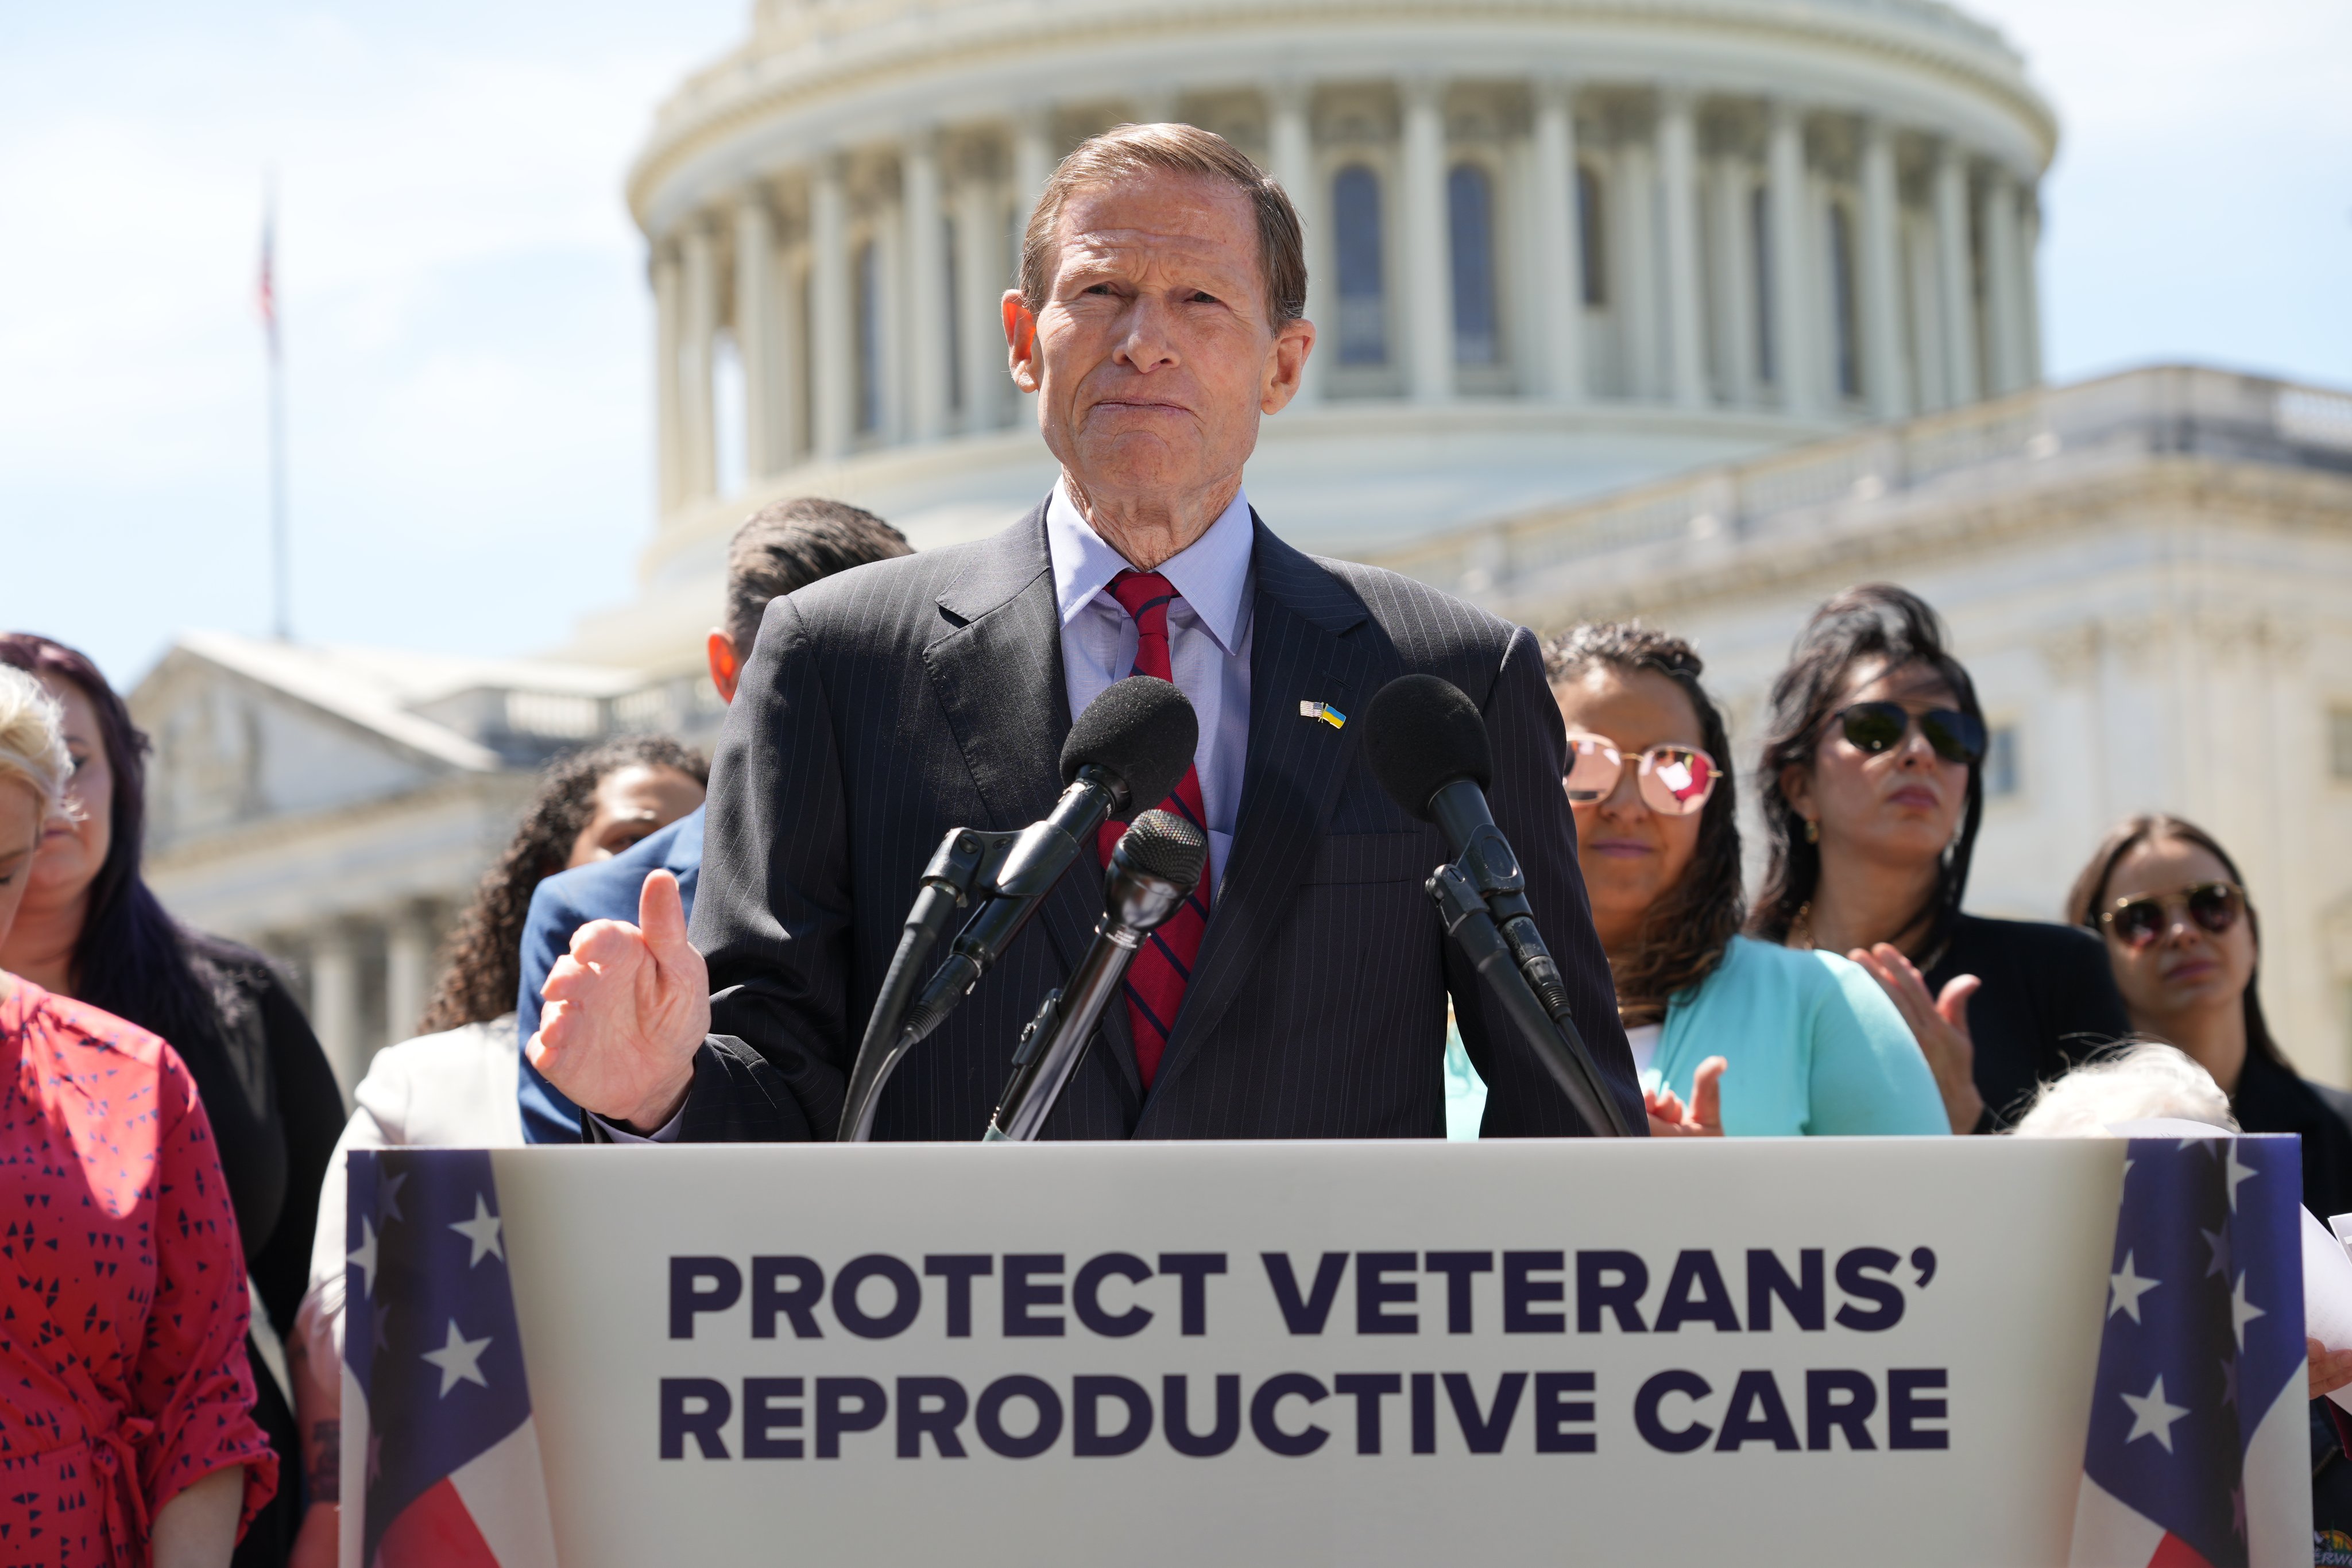 U.S. Senator Richard Blumenthal (D-CT) joined reproductive rights groups and veterans at a press conference to oppose the Republican-led Congressional Review Act resolution to disapprove of the Department of Veteran Affairs’ interim rule on reproductive health care.